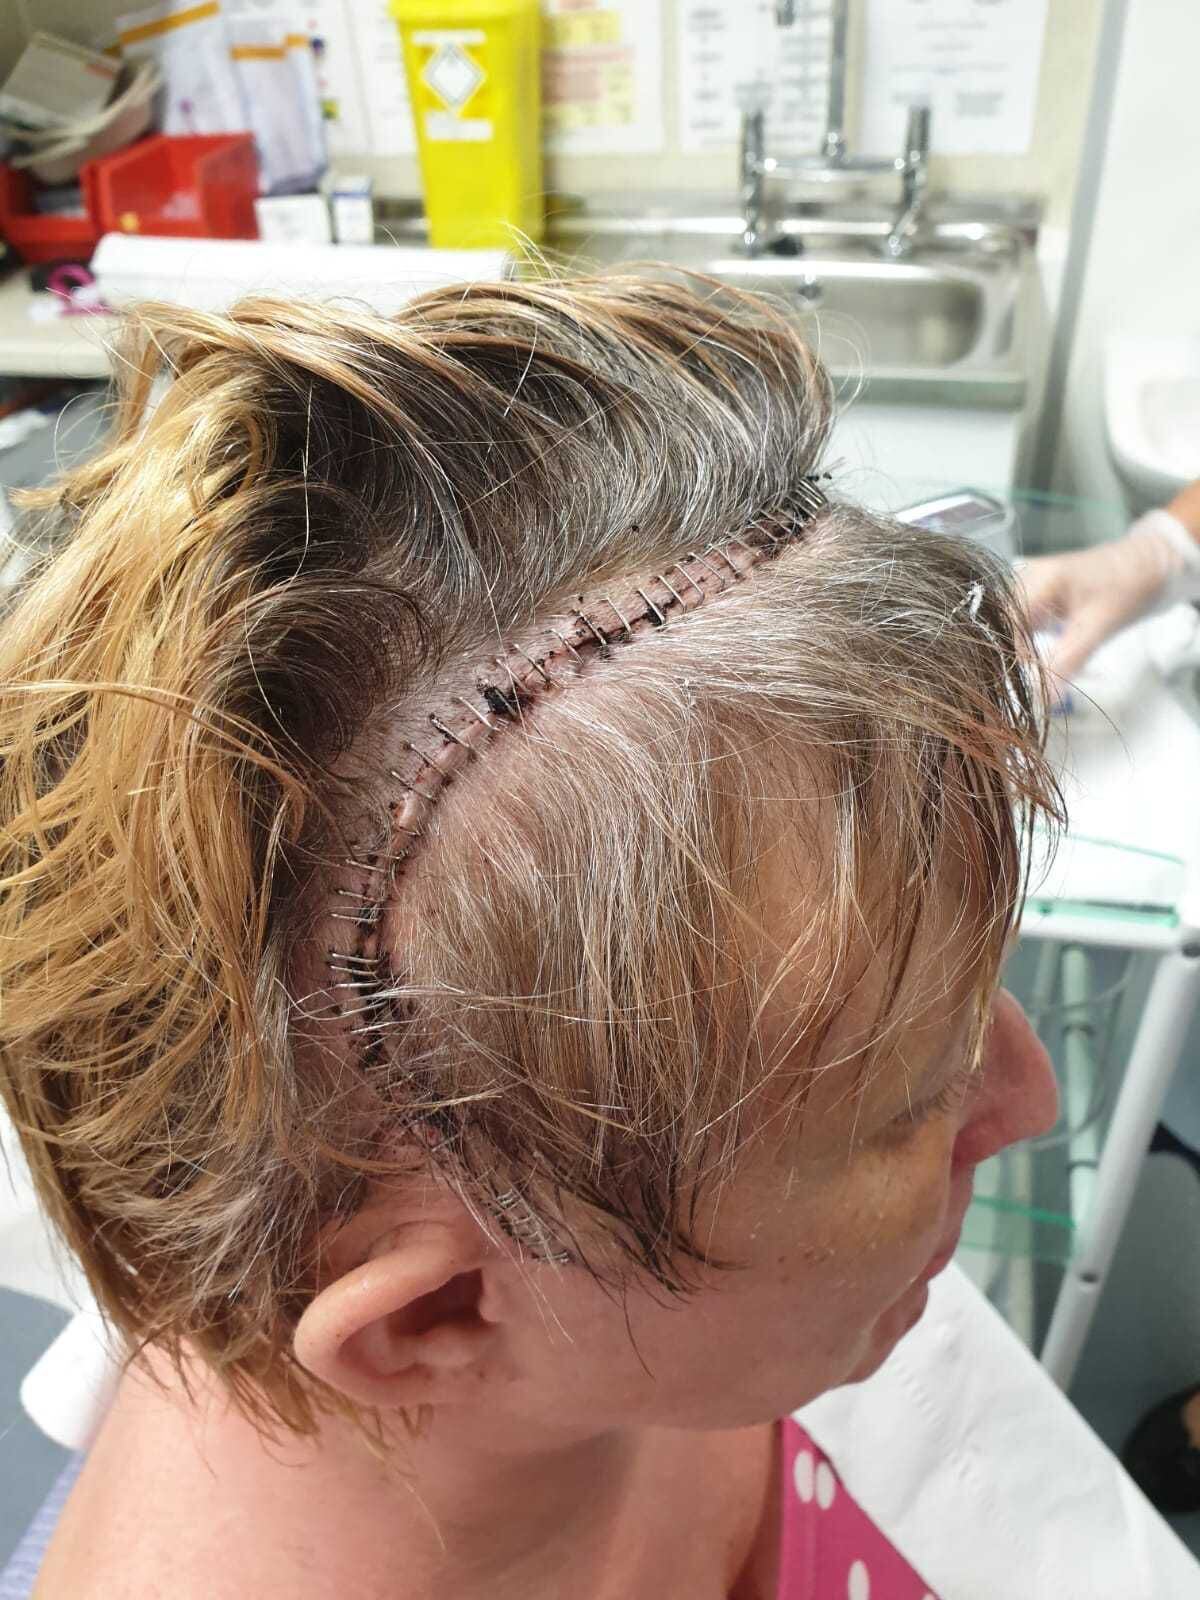 Jo had 67 staples after her surgery